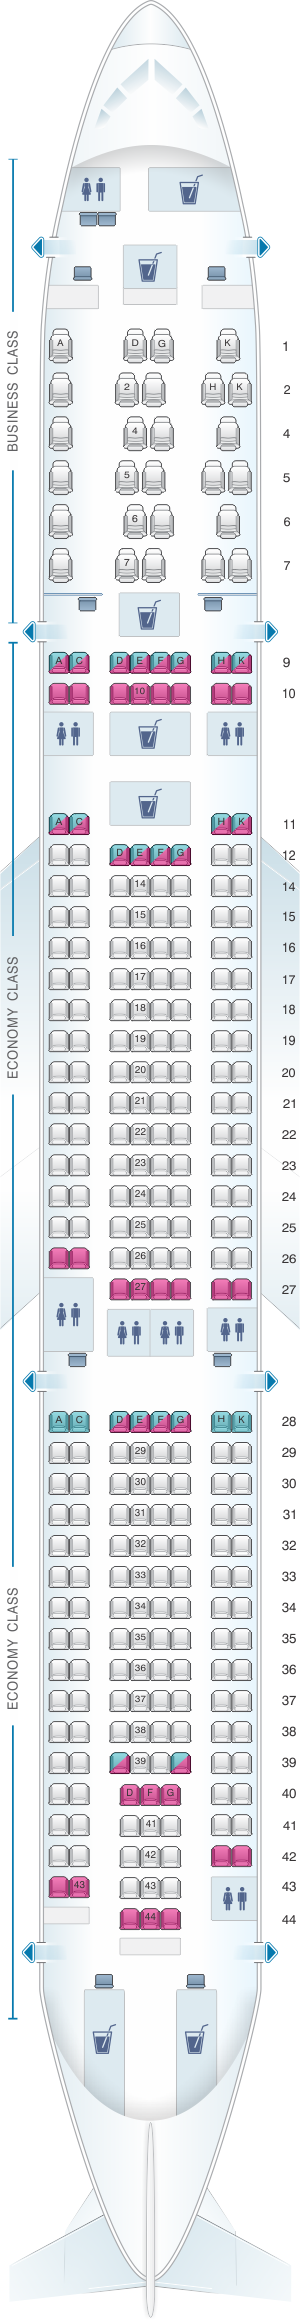 Seat Map Malaysia Airlines Airbus A330 300 Config.2 | SeatMaestro